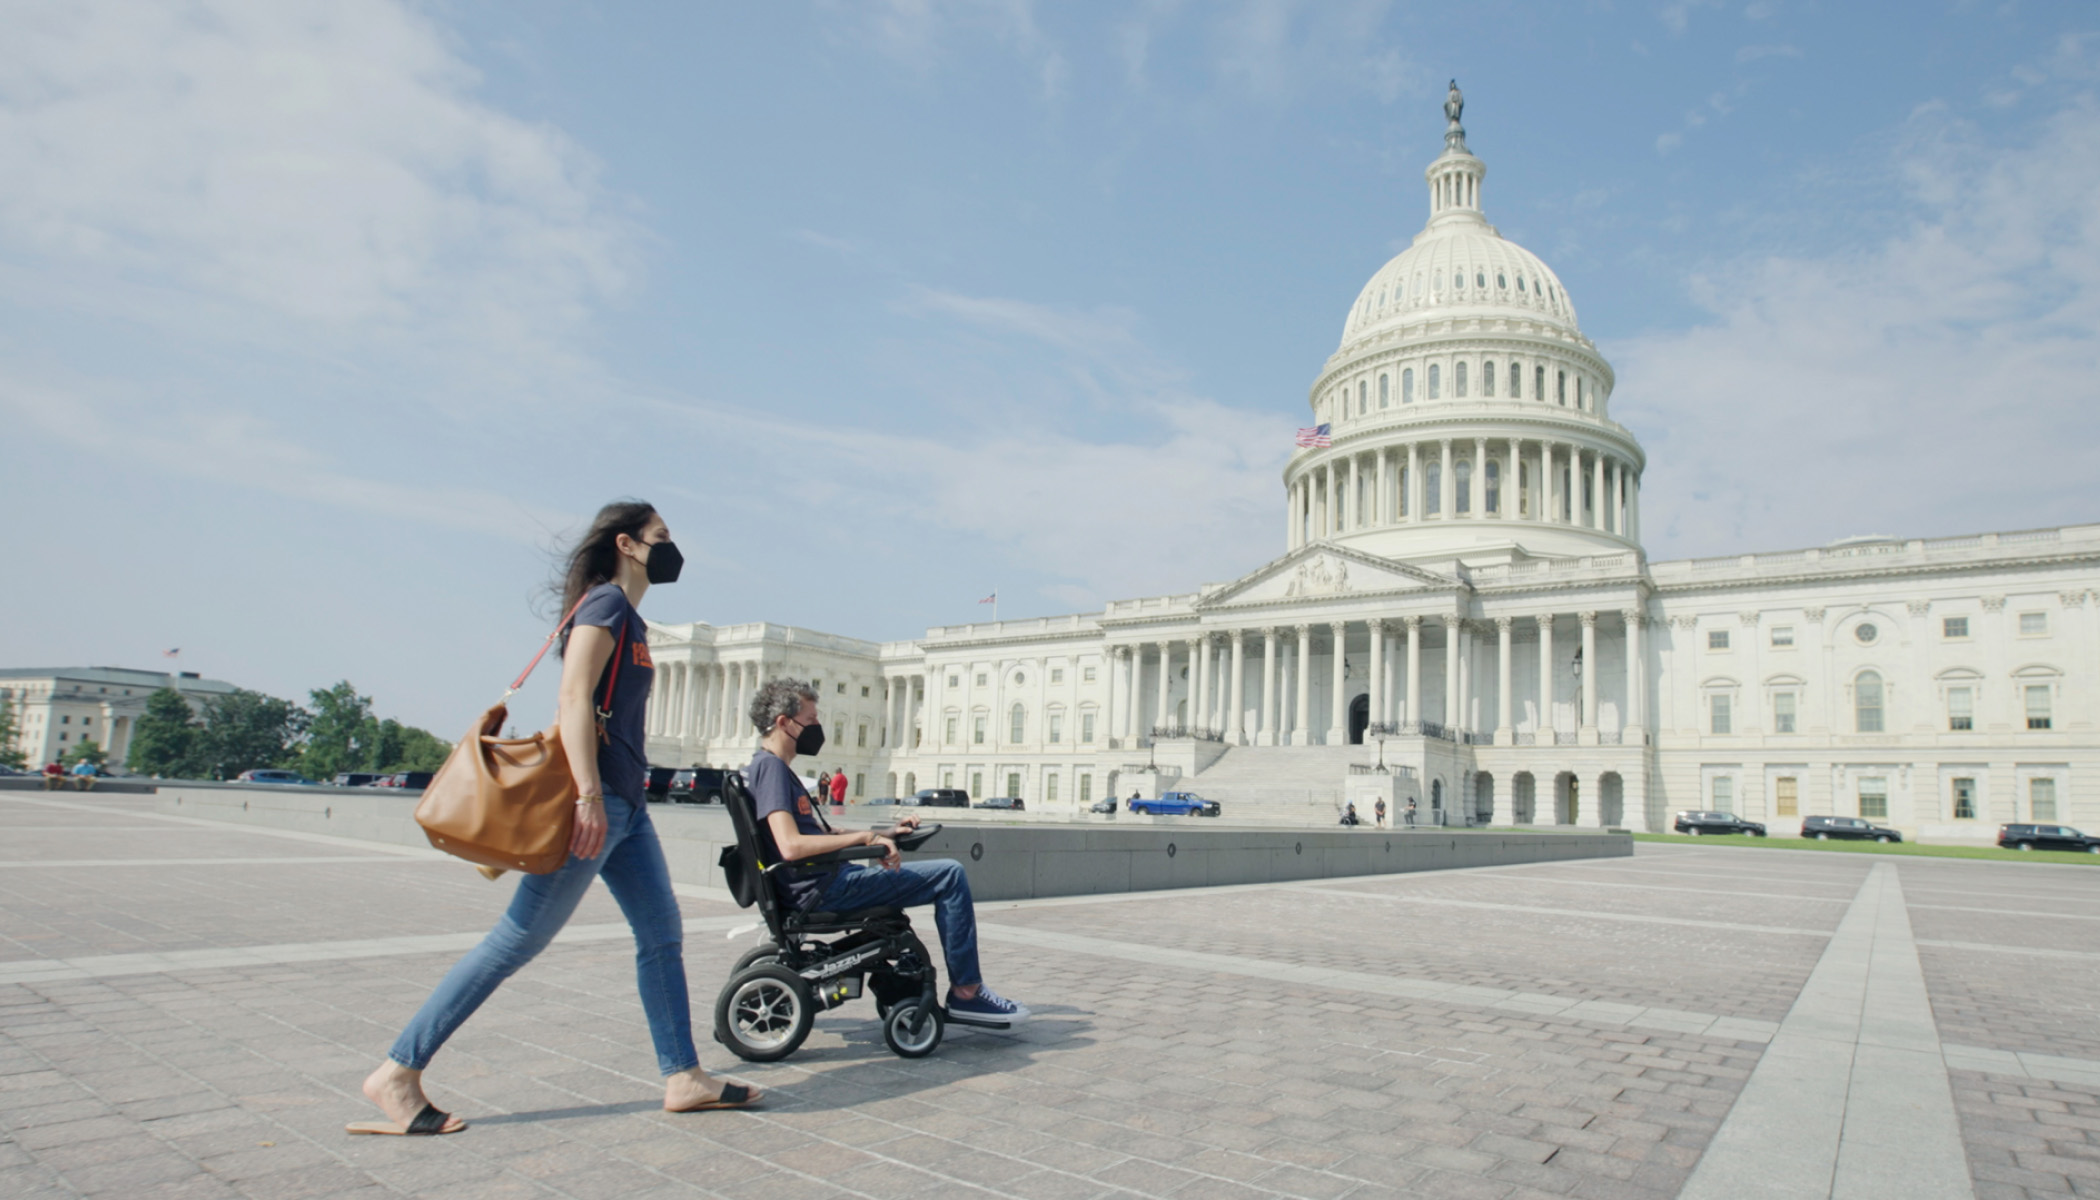 Woman pushing a man in a wheelchair in front of the Capitol Building in Washington, D.C.